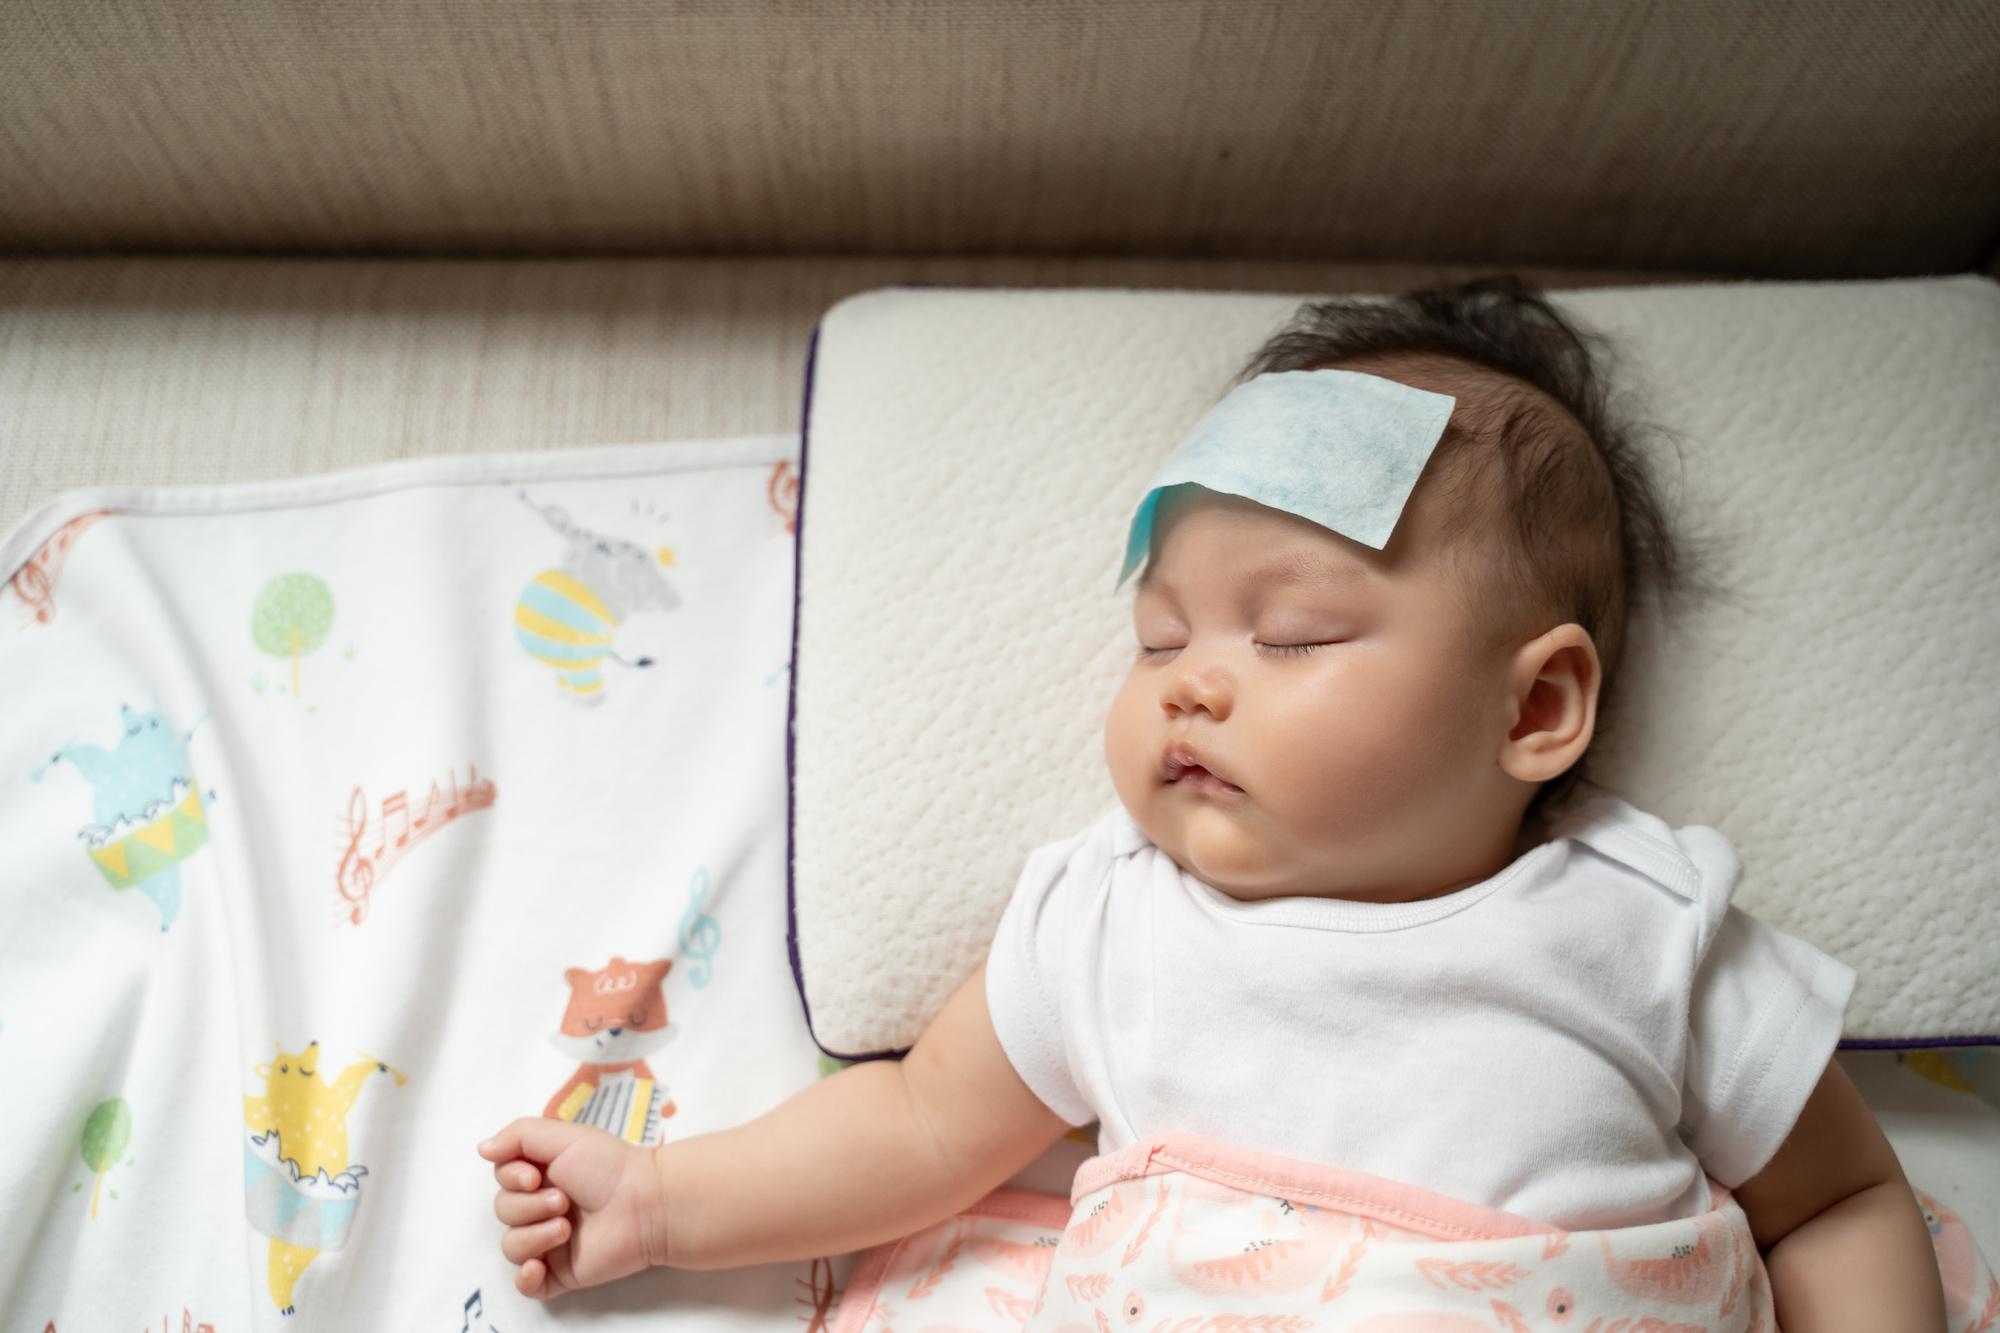 A sleeping baby with signs of fever in babies - Baby Fever in Infants, High Fever in Kids - babyjourney.net
